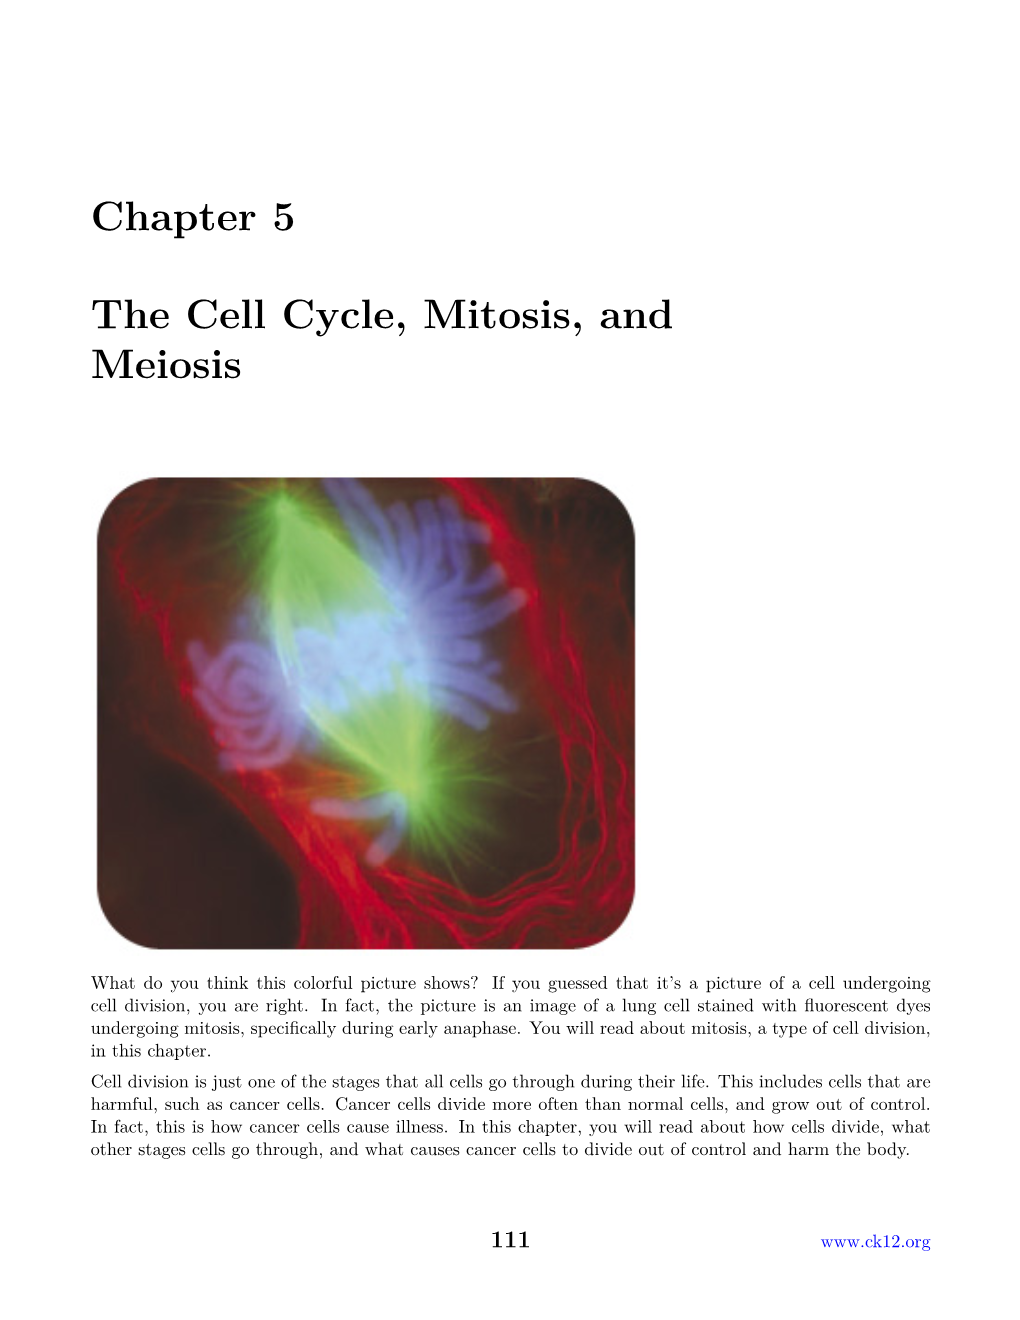 chapter-5-the-cell-cycle-mitosis-and-meiosis-docslib